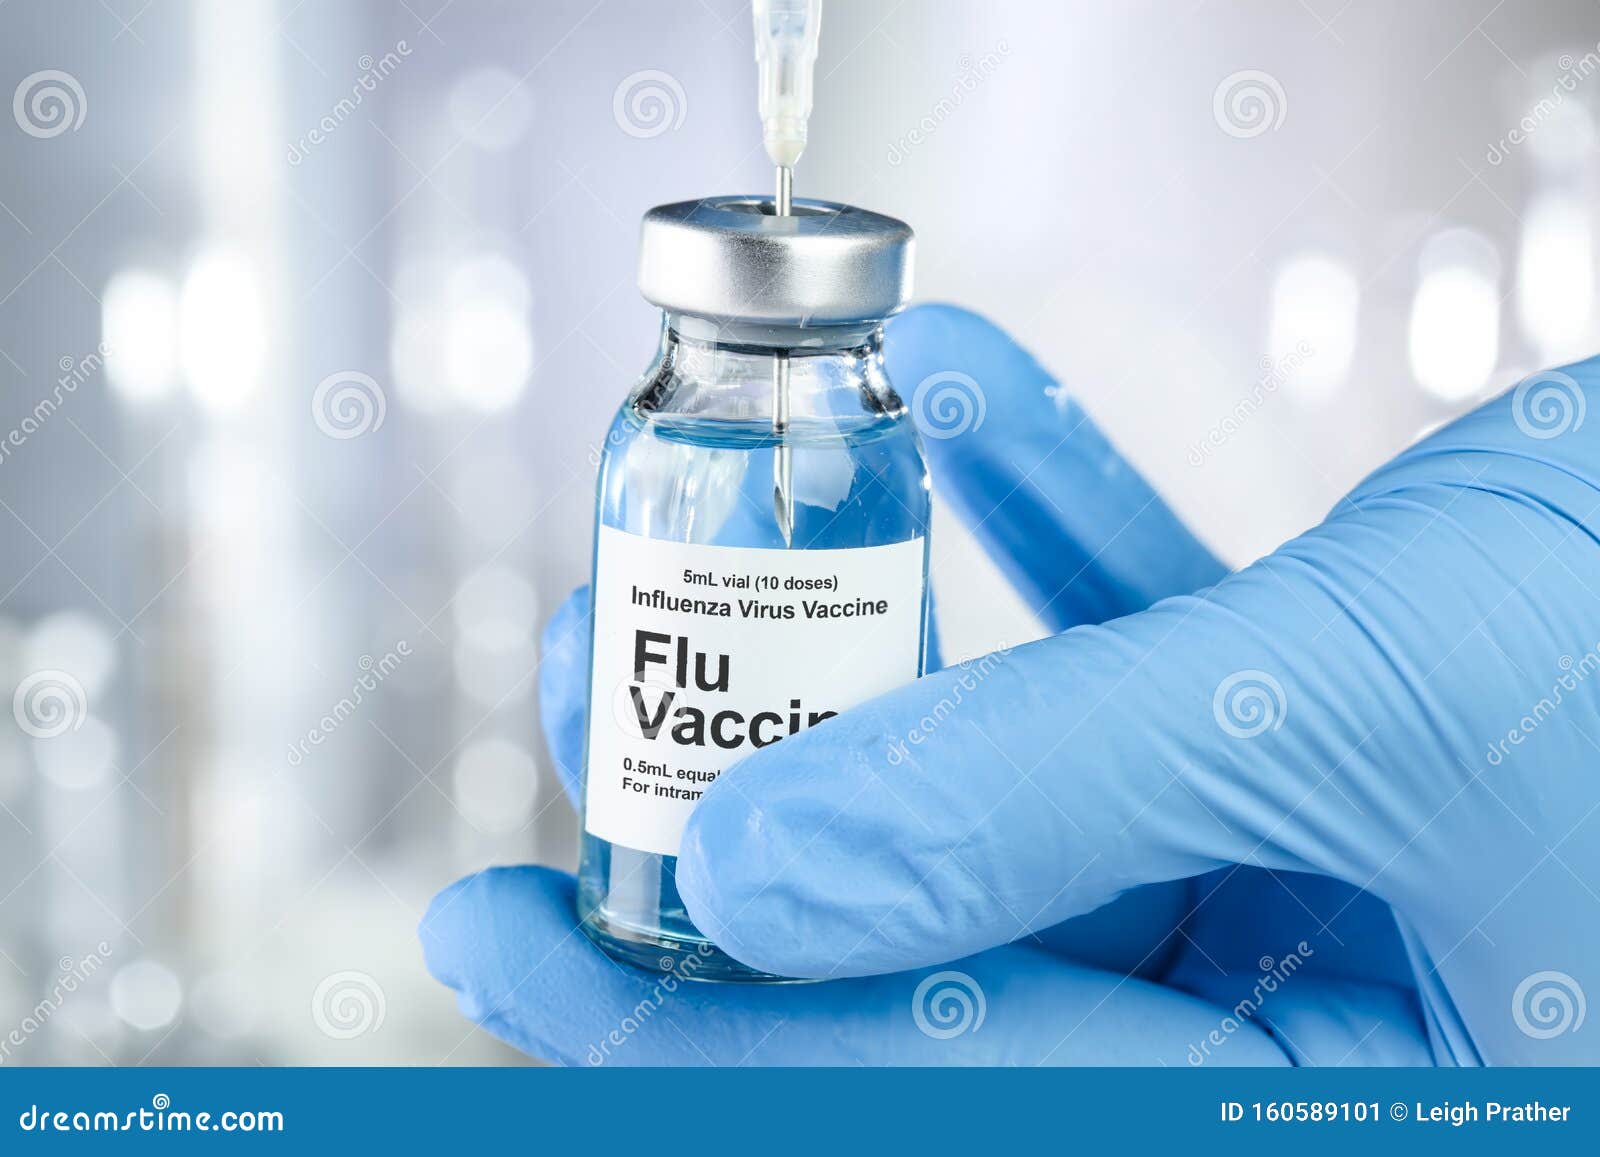 healthcare concept with a hand in medical gloves holding flu, influenza, vaccine vial